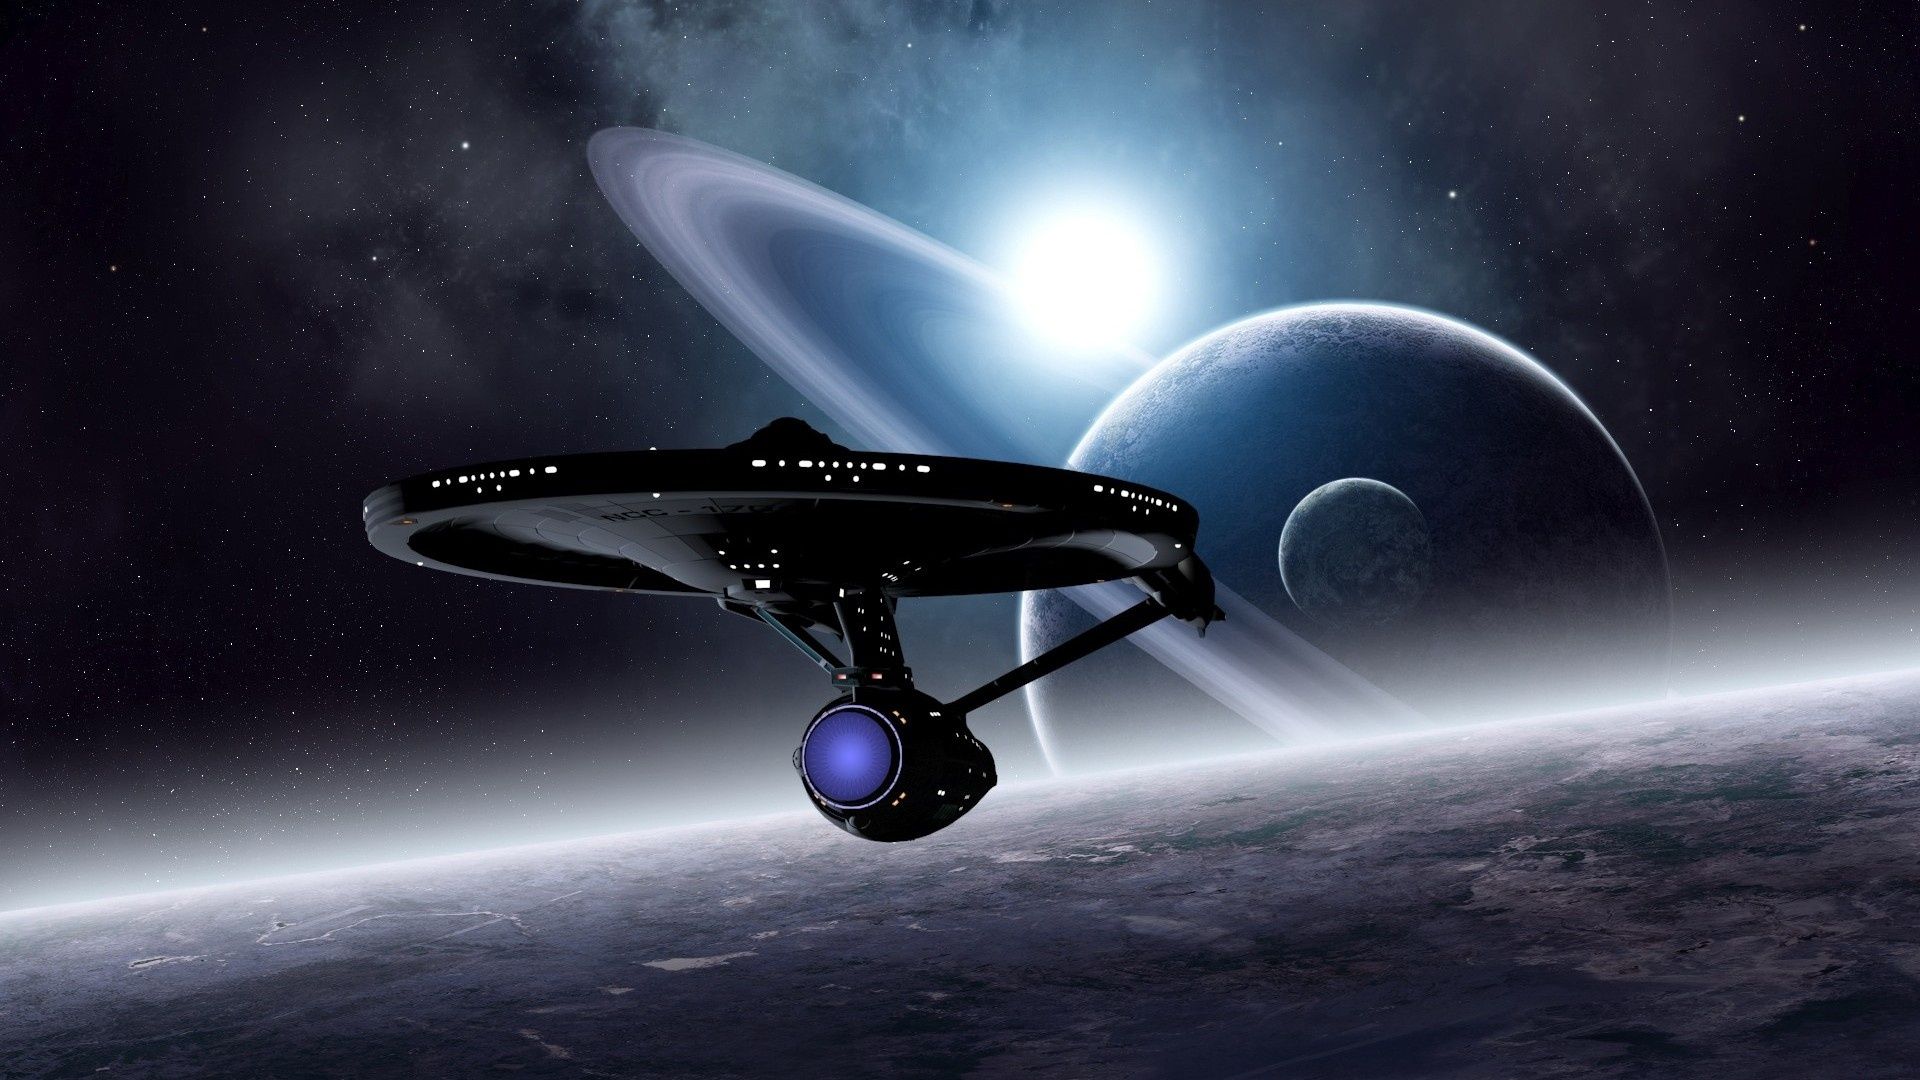 The Universe Space Spaceship Wallpaper. Star trek enterprise, Star trek, Star trek ships